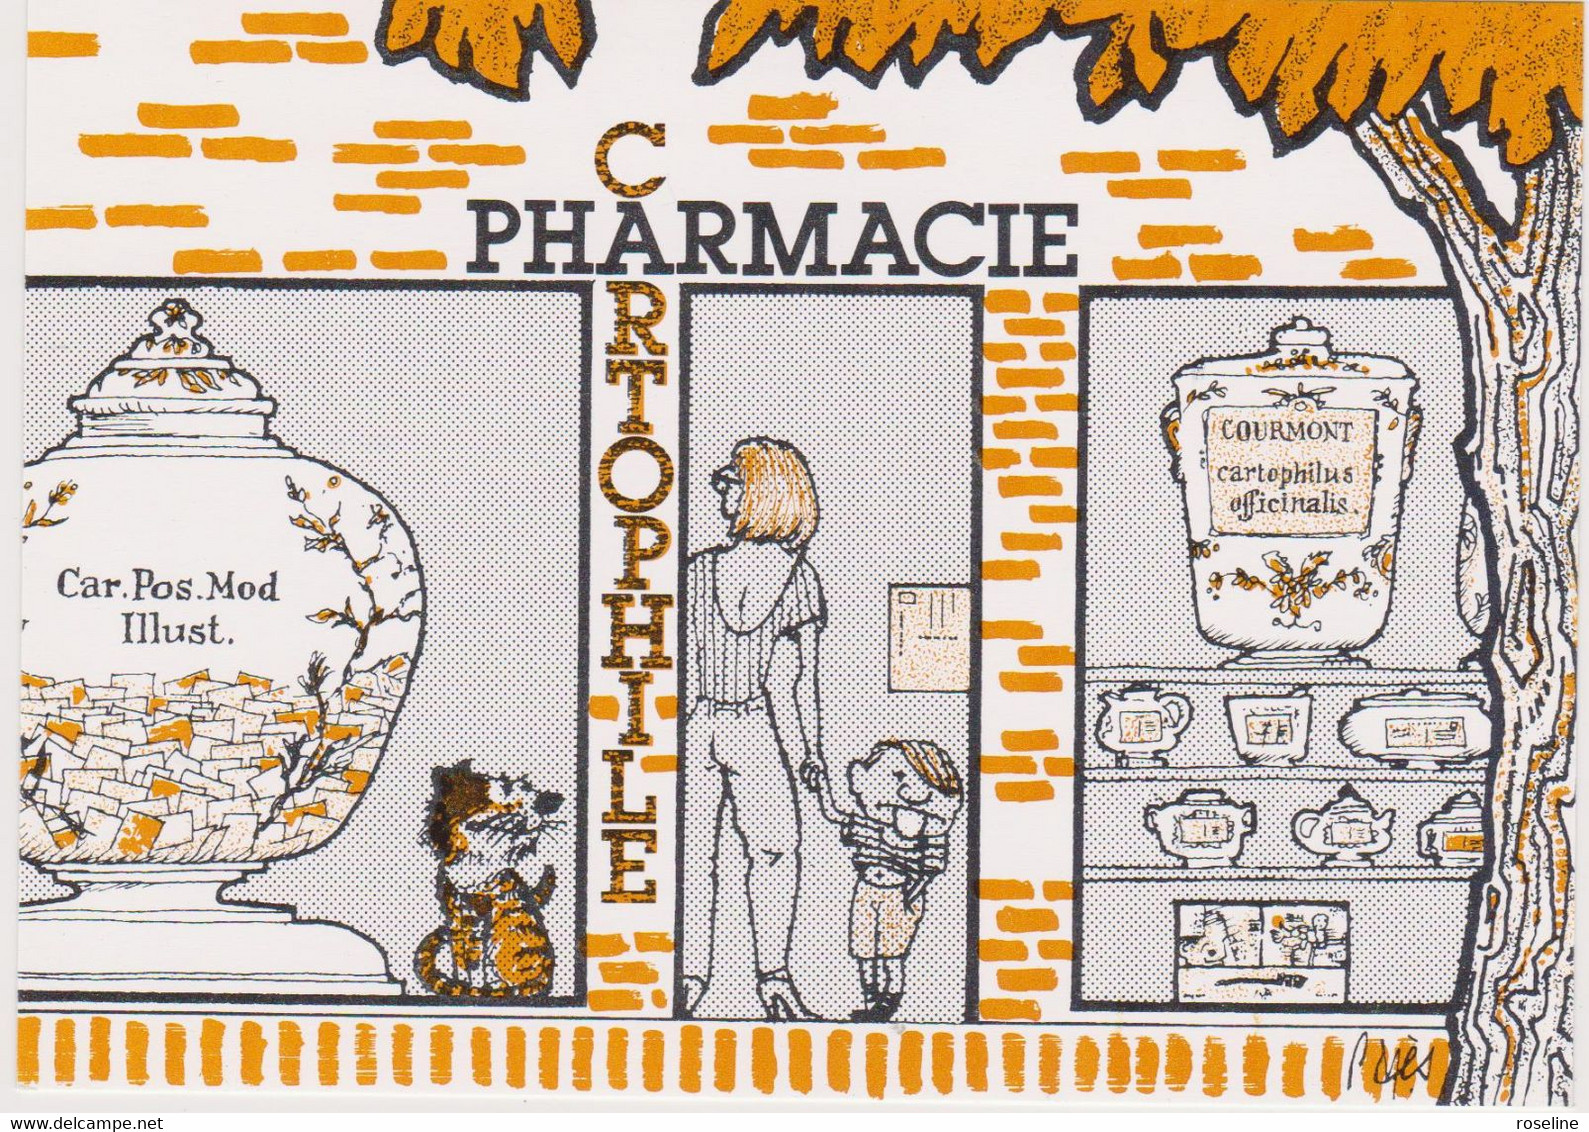 Illustration PAGES Raymond Pharmacie Cartophile  - CPM 10,5x15 TBE 1986 Neuve - Pages